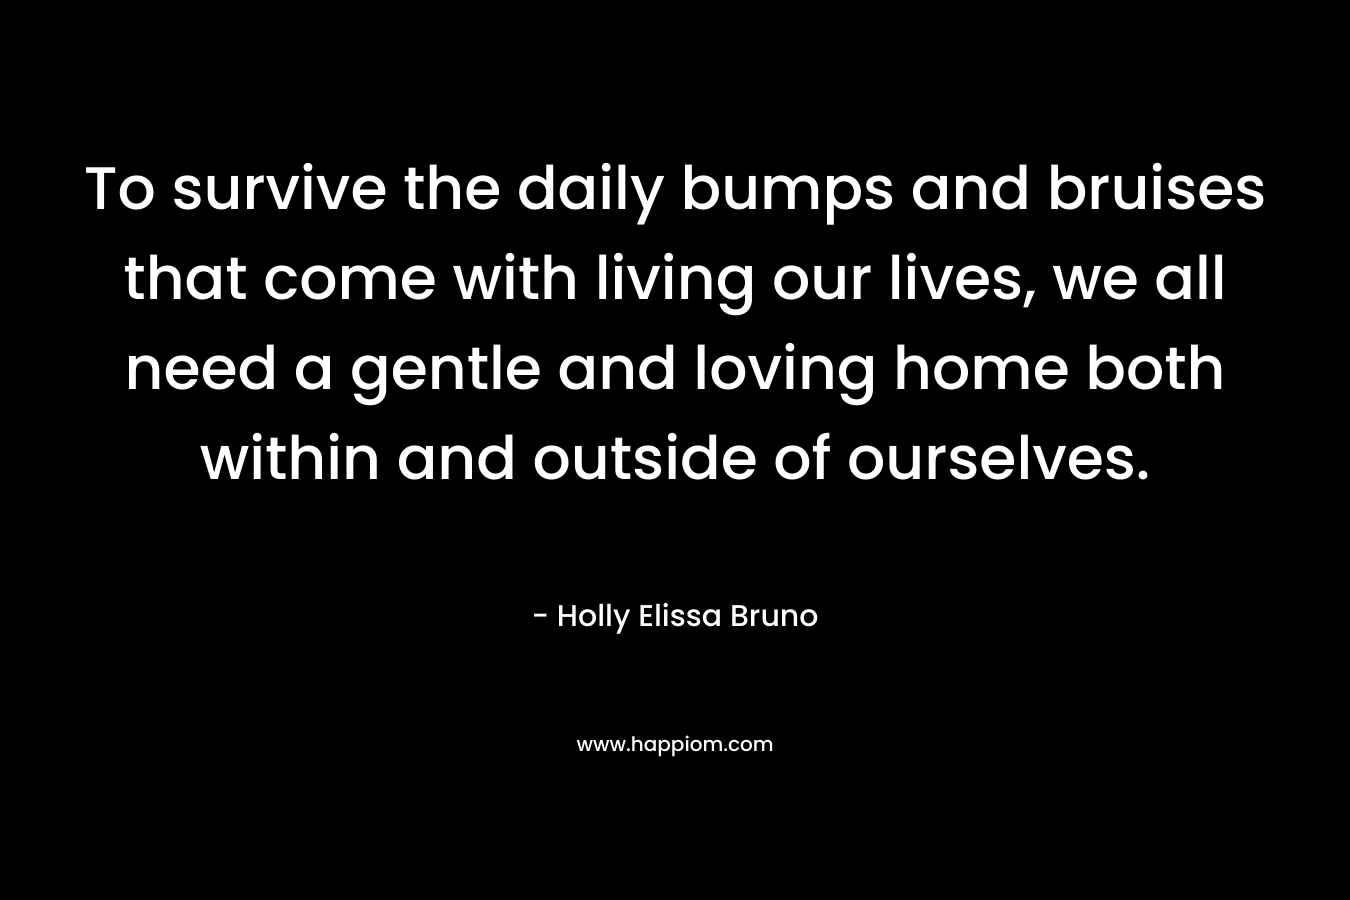 To survive the daily bumps and bruises that come with living our lives, we all need a gentle and loving home both within and outside of ourselves.